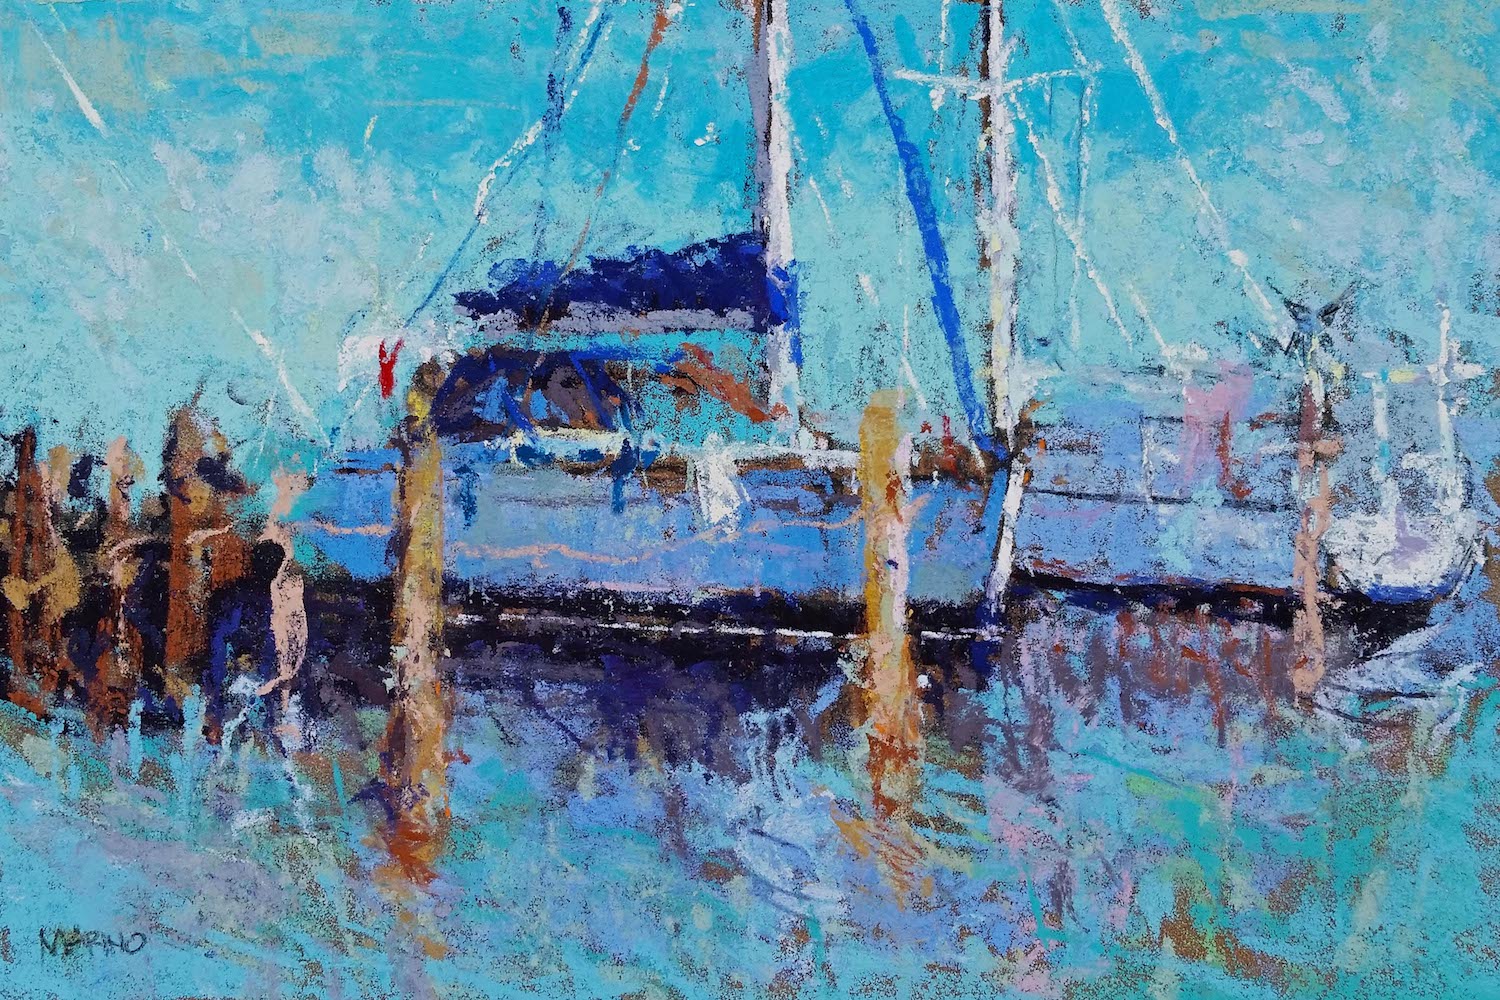 Maria Marino, "Ready to Sail," pastel on Sennelier LaCarte paper, 6 x 9 in. Sold. Painted from a photo of a scene located in Eastport, MD which is located next to Annapolis, MD (sailing capital of the world).